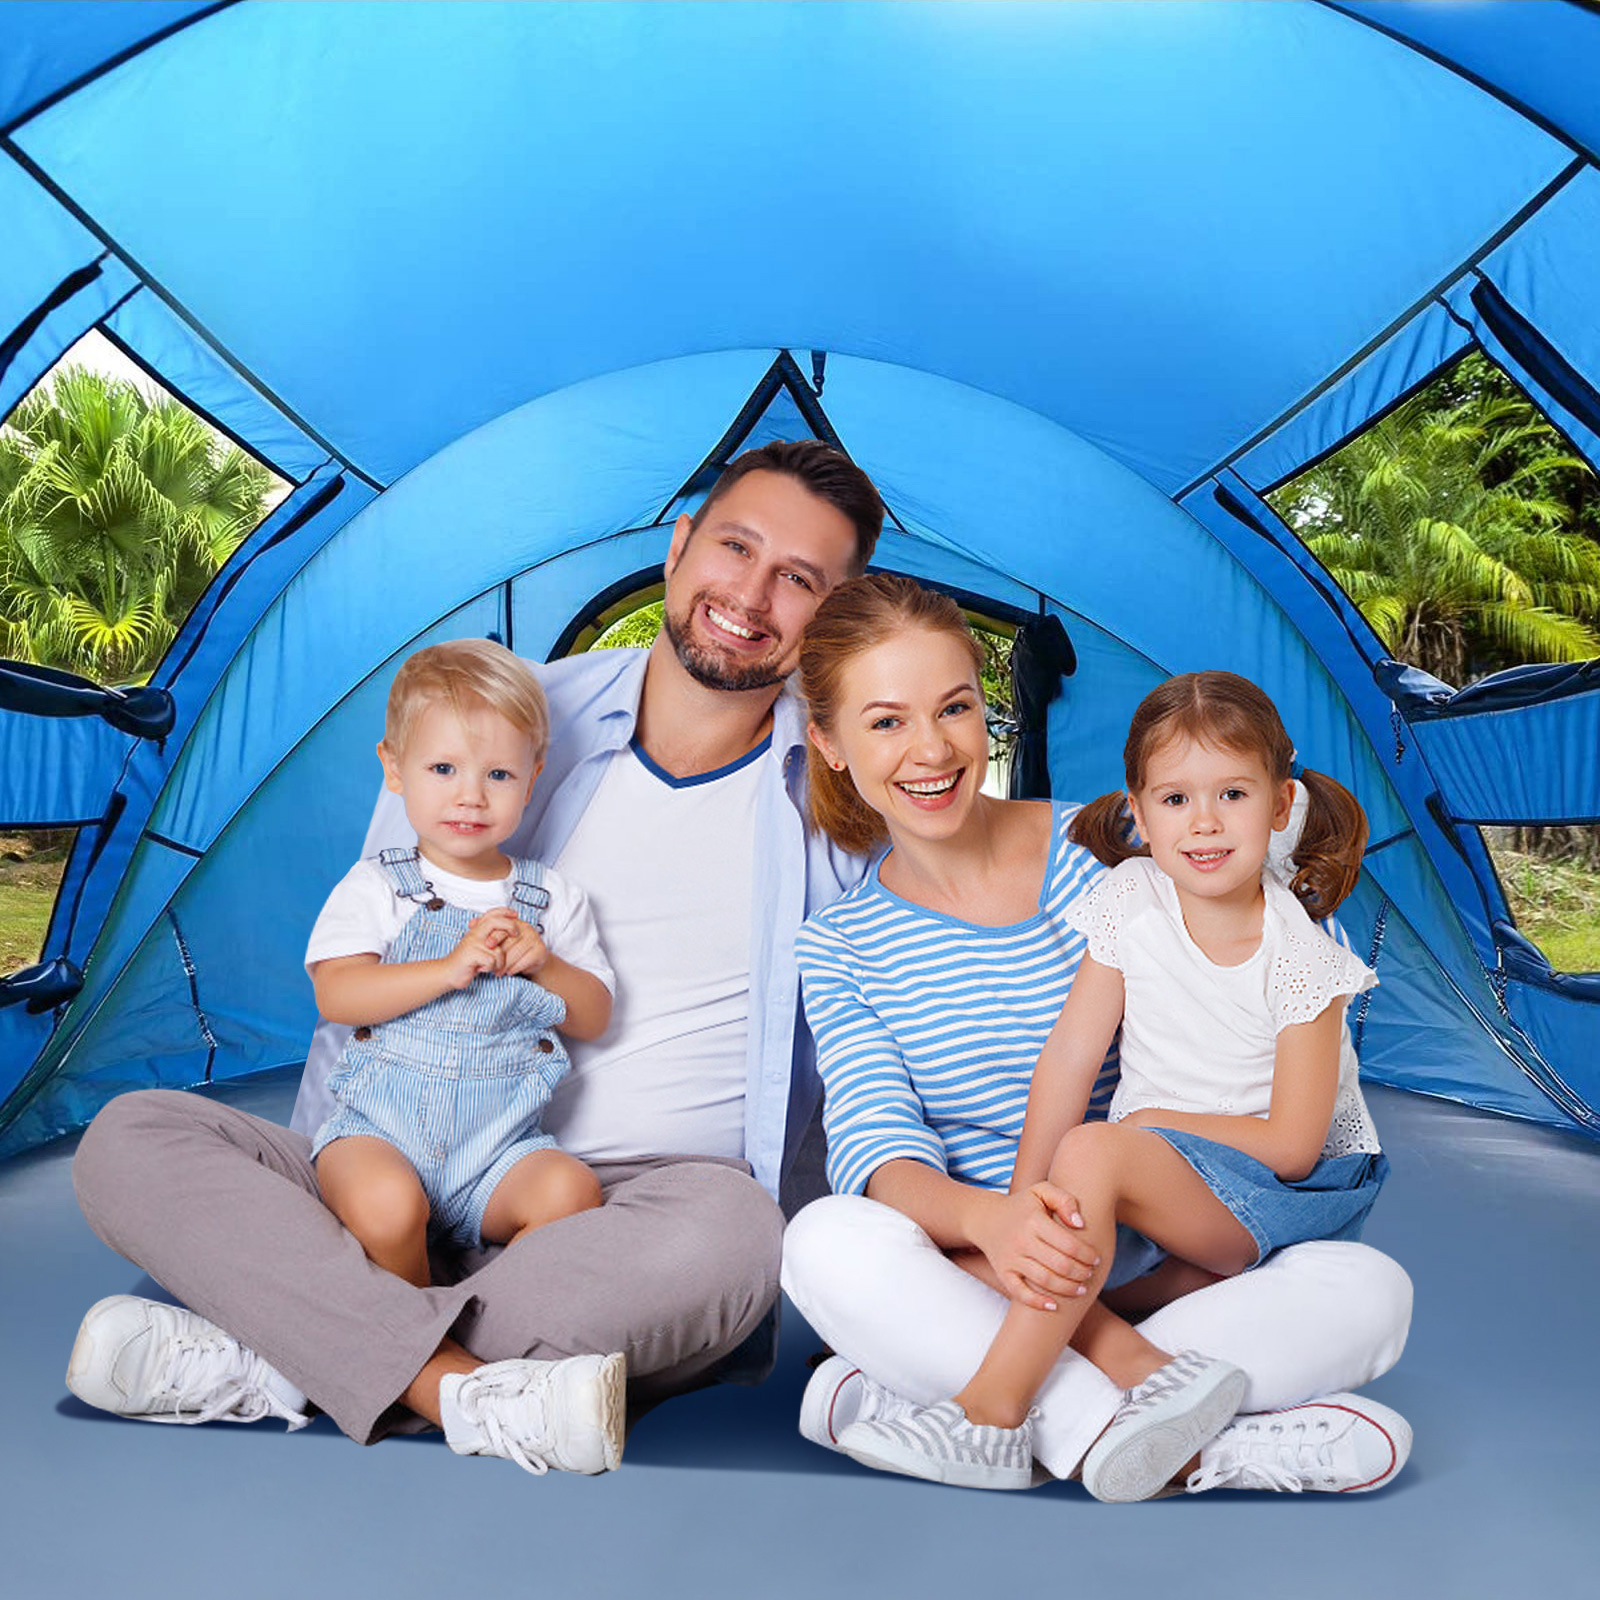 QOMOTOP Instant Tent 4-Person Camp Tent, Automatic Setup Pop Up Tent, Waterproof, Huge Side Screen Windows, Blue - image 2 of 8